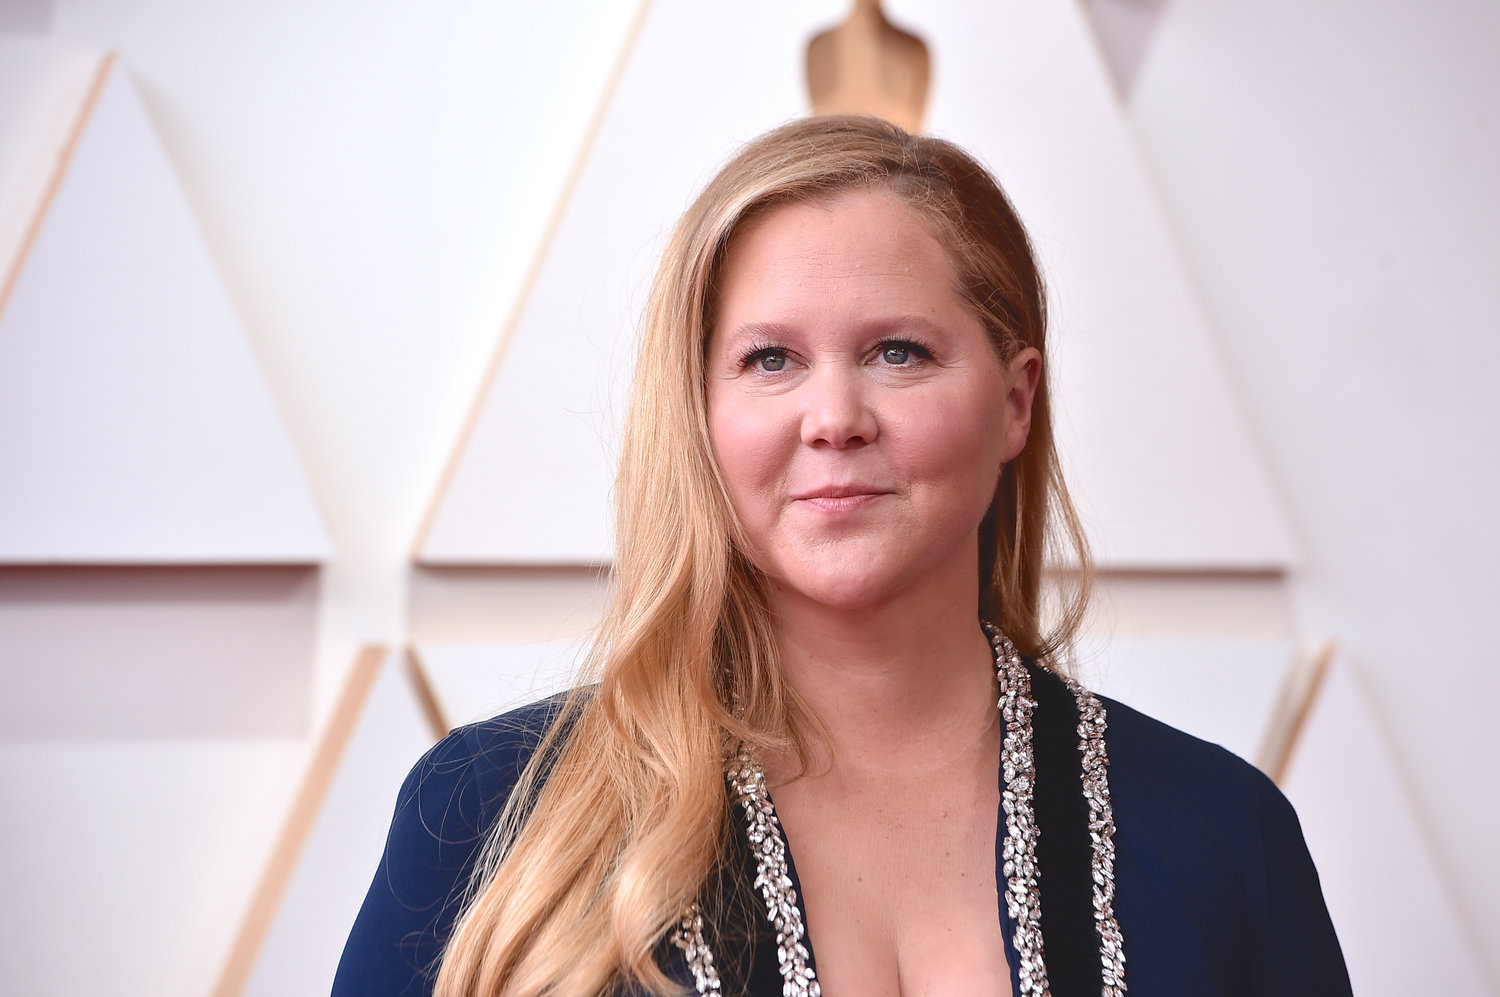 Tickets on sale for Amy Schumer performance at Turning Stone Daily